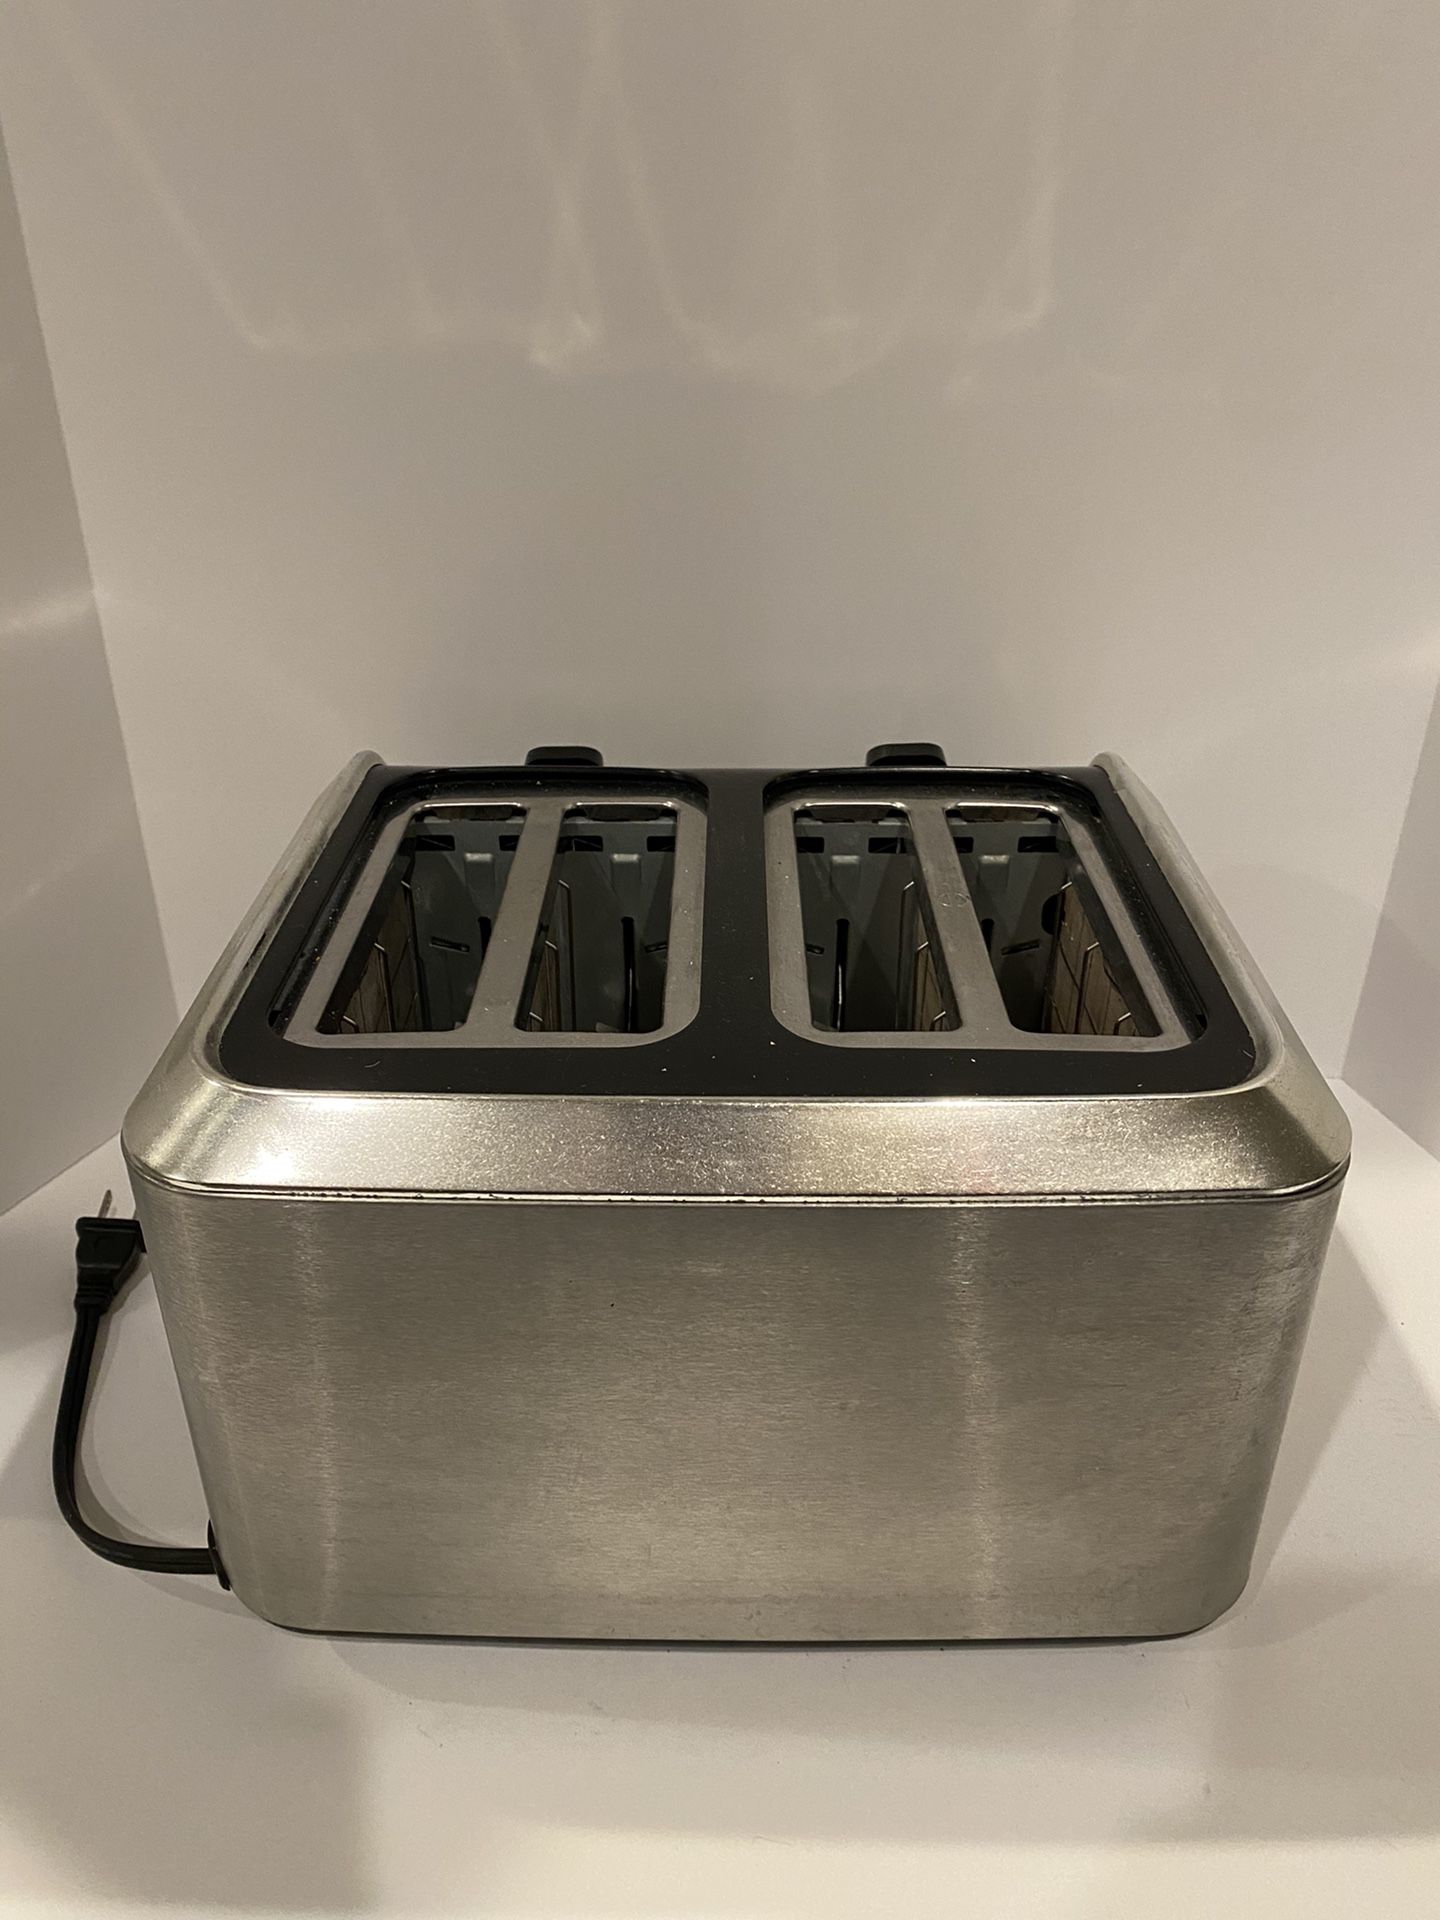 Black And Decked Toaster Stainless Steel Model TR1400SB